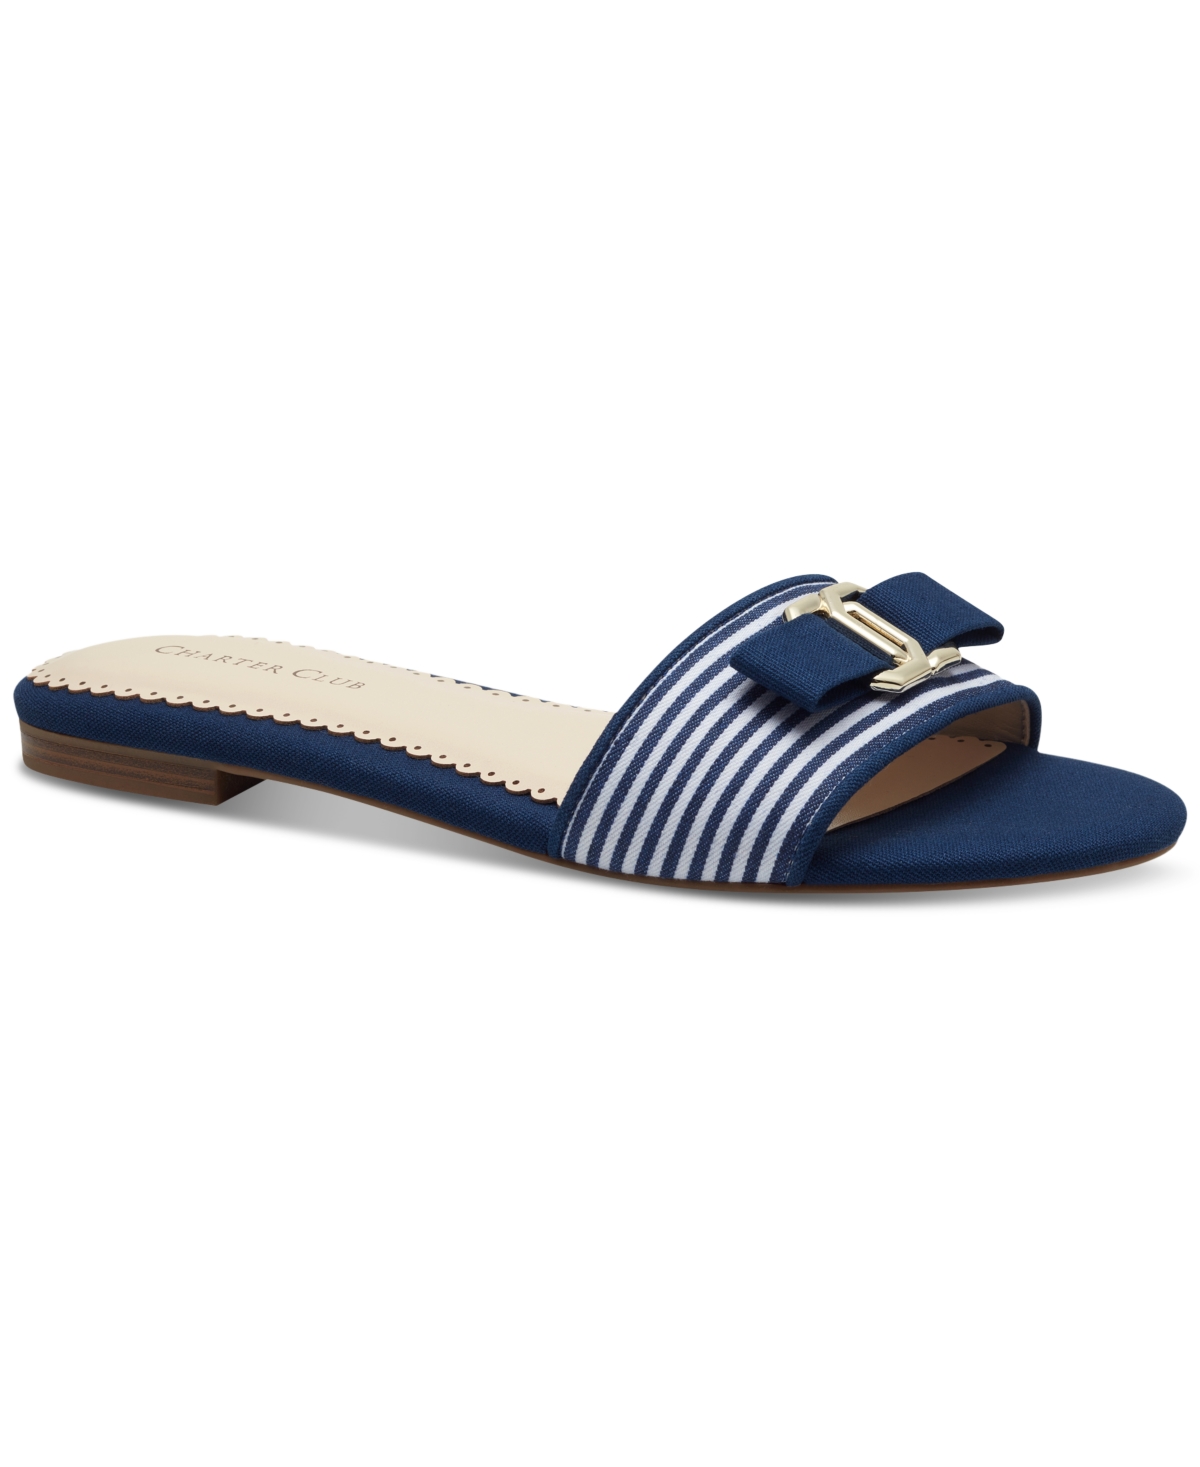 Charter Club Skyla Slip-On Bow Flat Sandals, Created for Macy's Women's Shoes